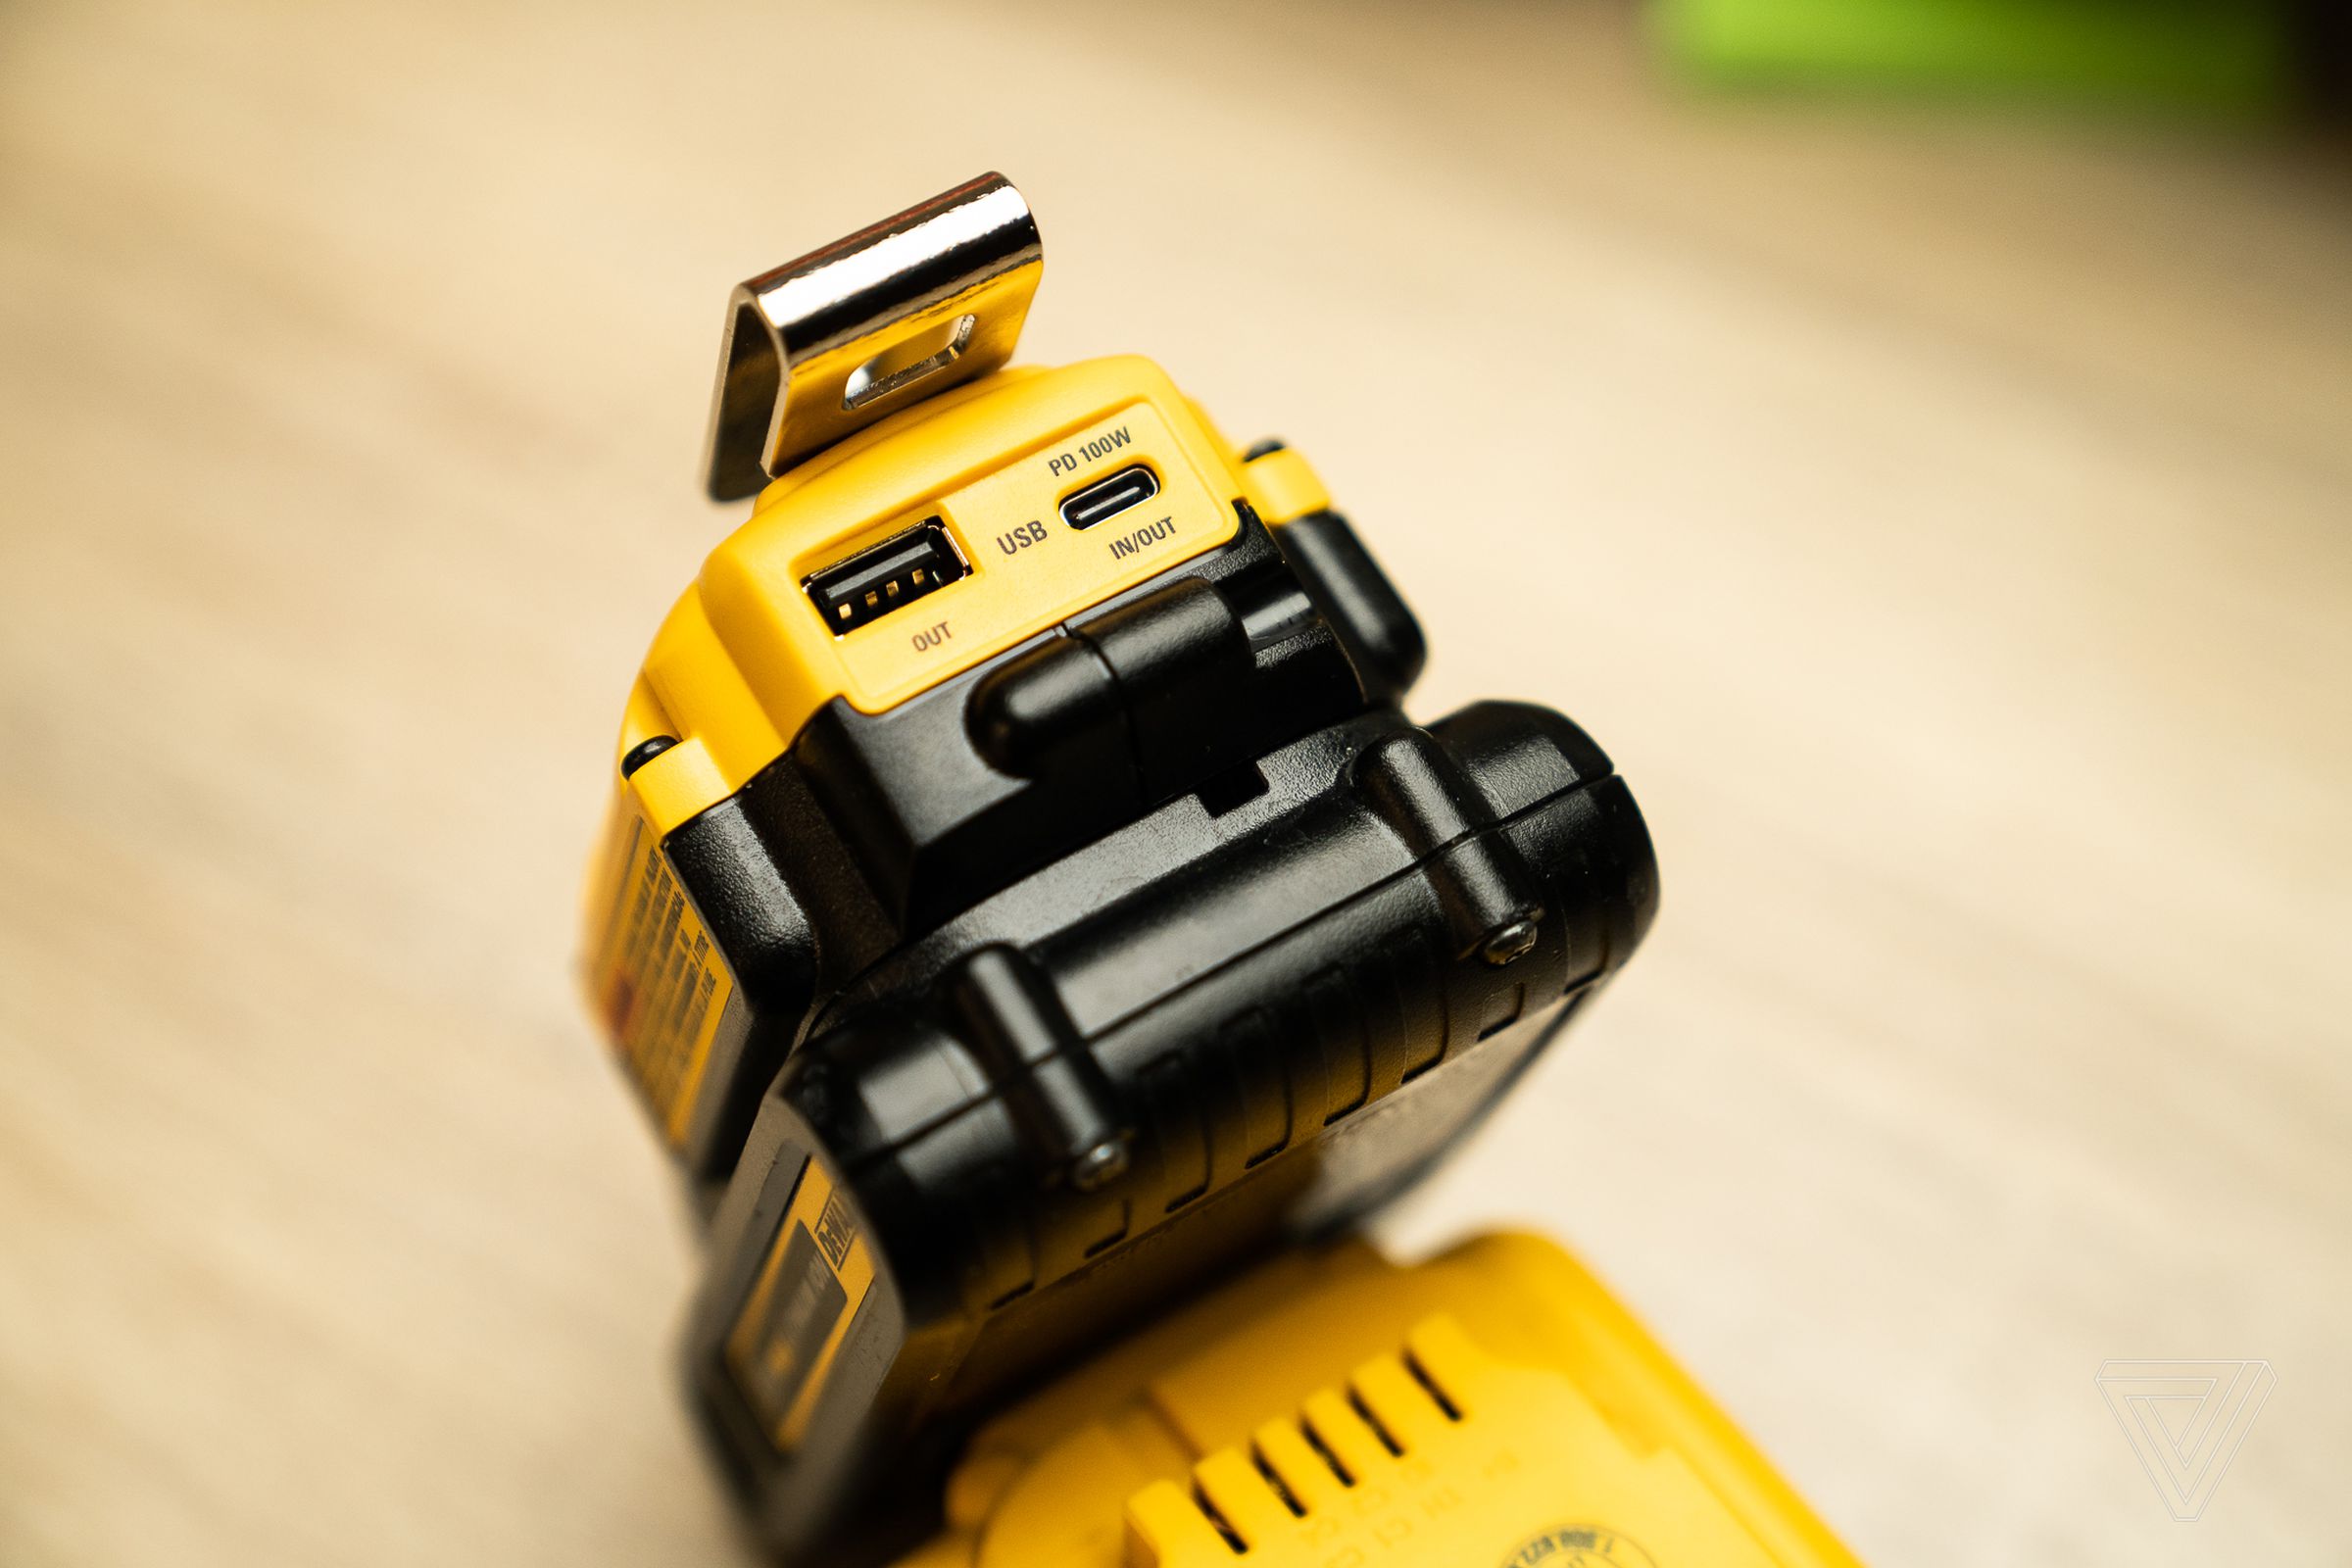 You get one 100W USB-C PD port, and one 12W USB-A port. The USB-A port will do passthrough charging while you’re charging the DeWalt battery, too.